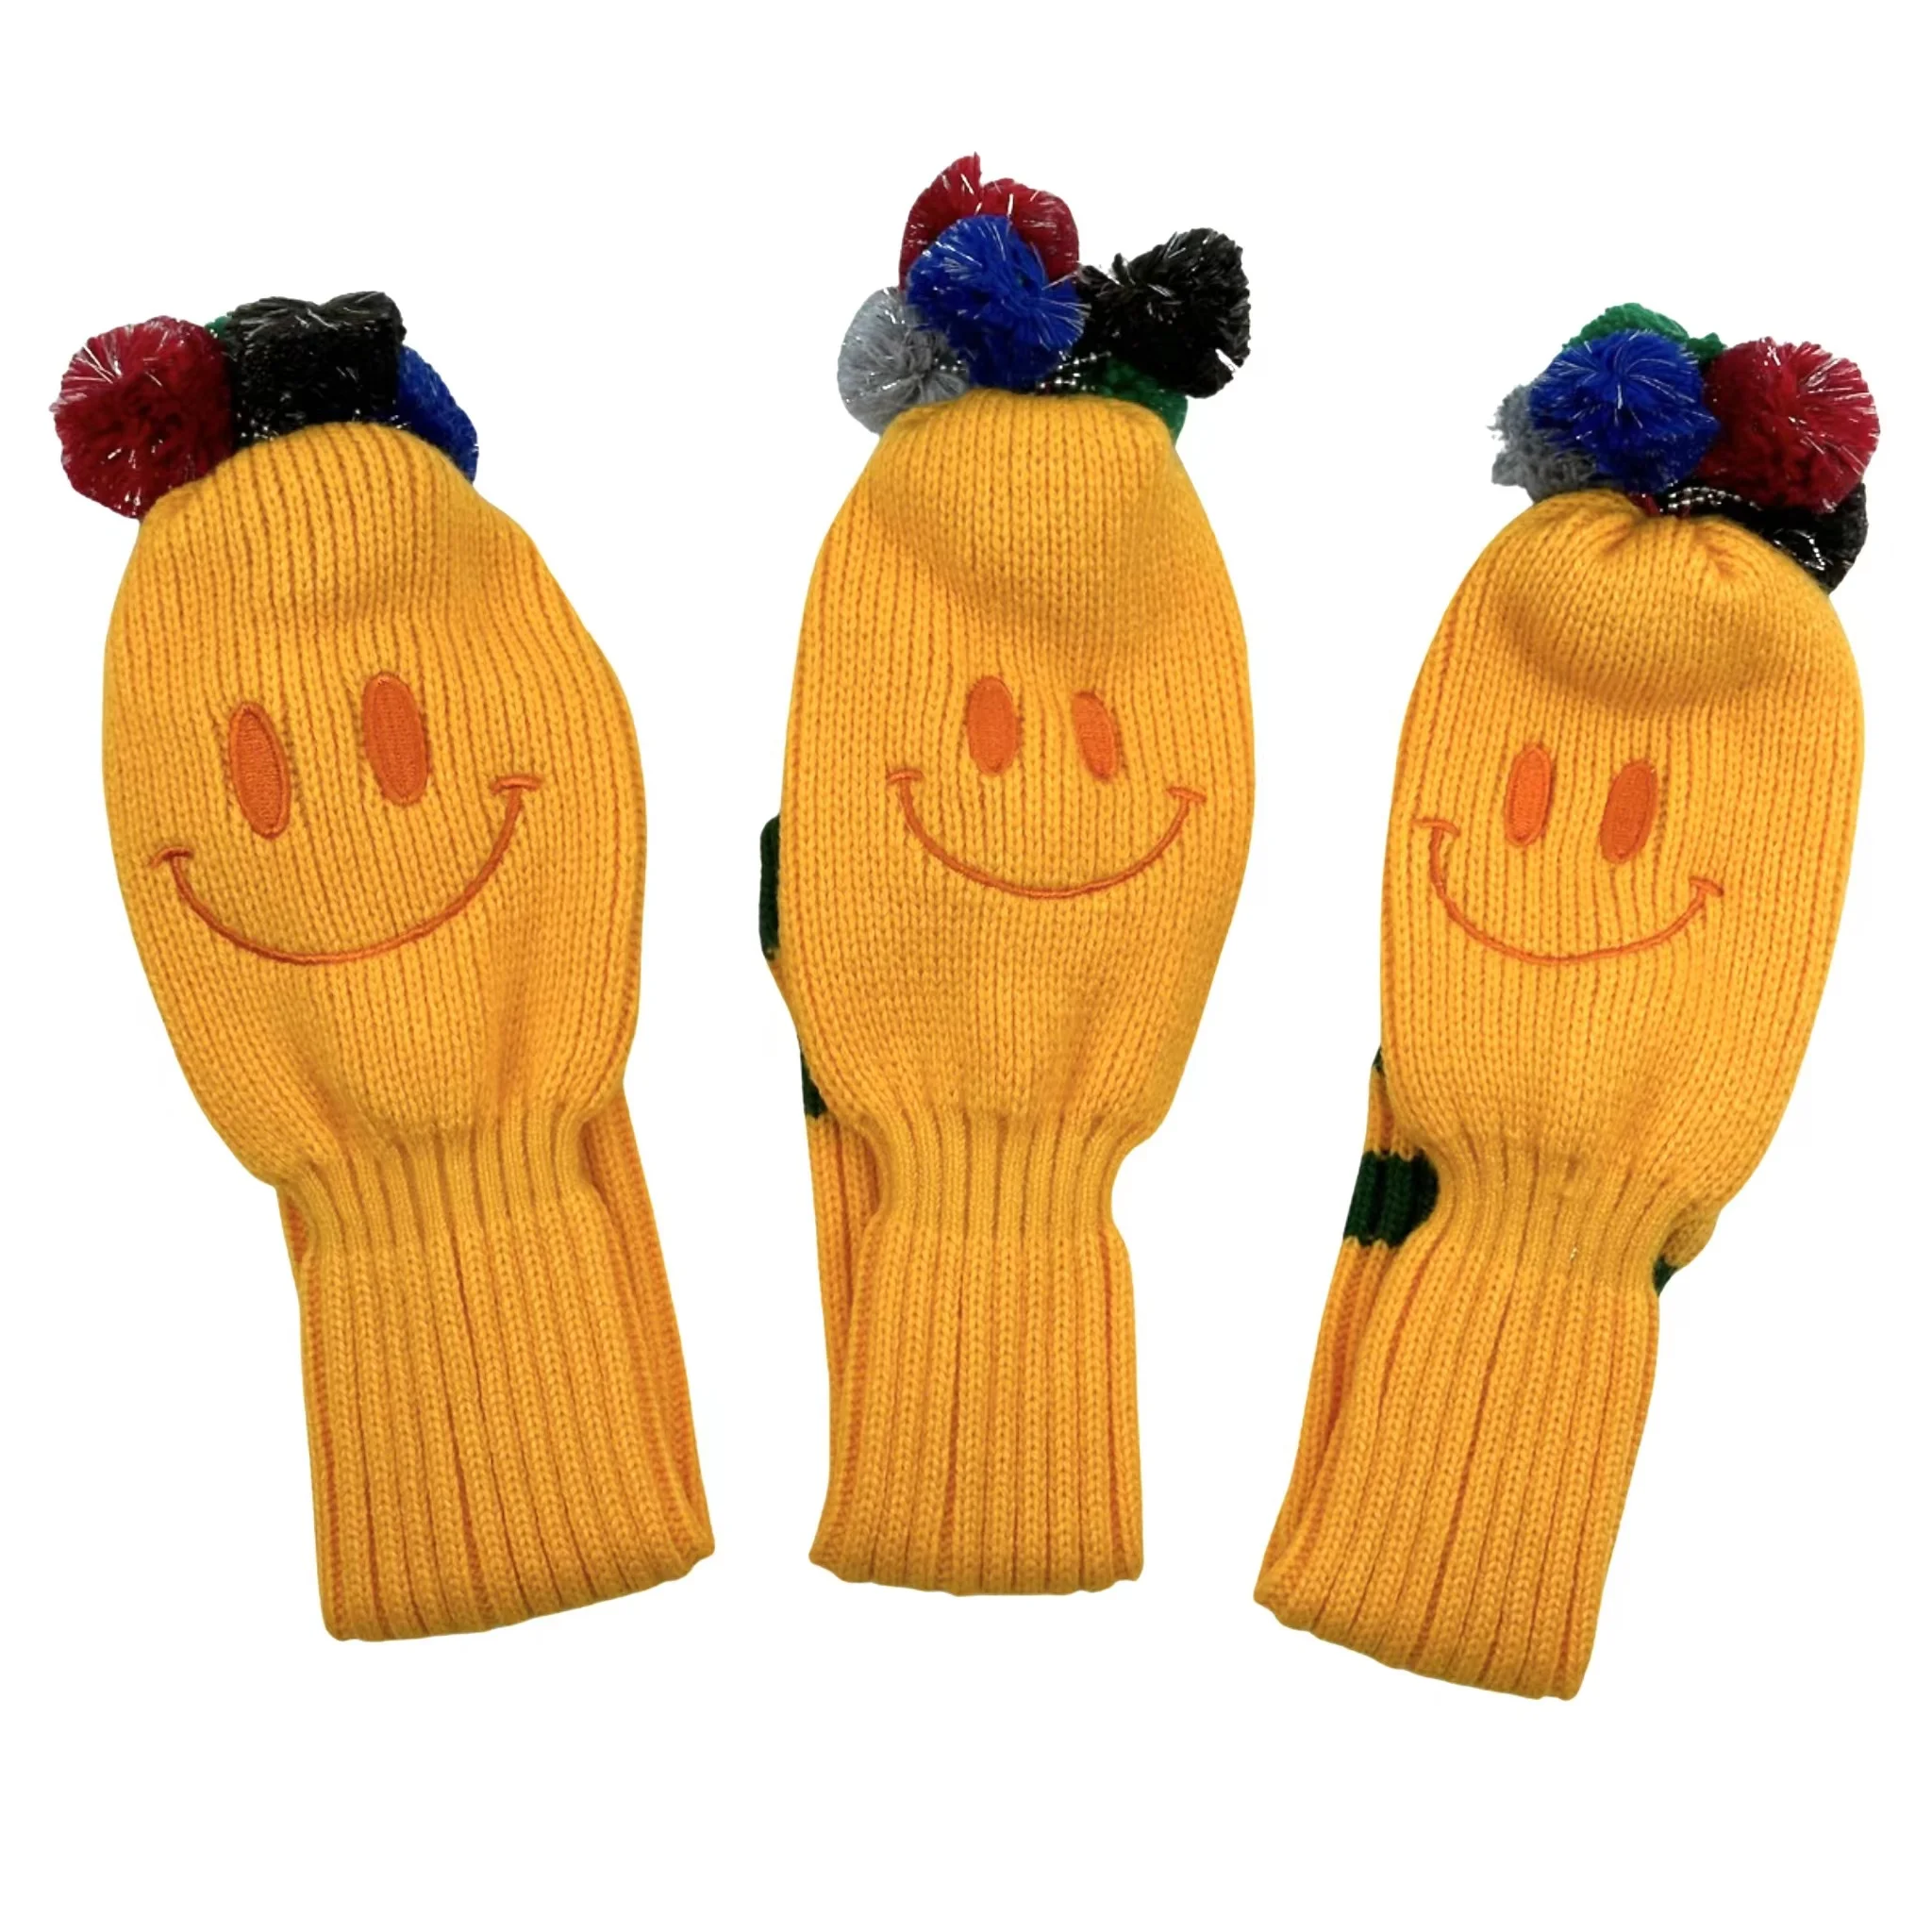 3 Pcs/set Golf Smiling Face Pattern clubs Head cover Knitted Hybrid UT Driver Fairway Wood 1 3 5 Wood Knitting Cover